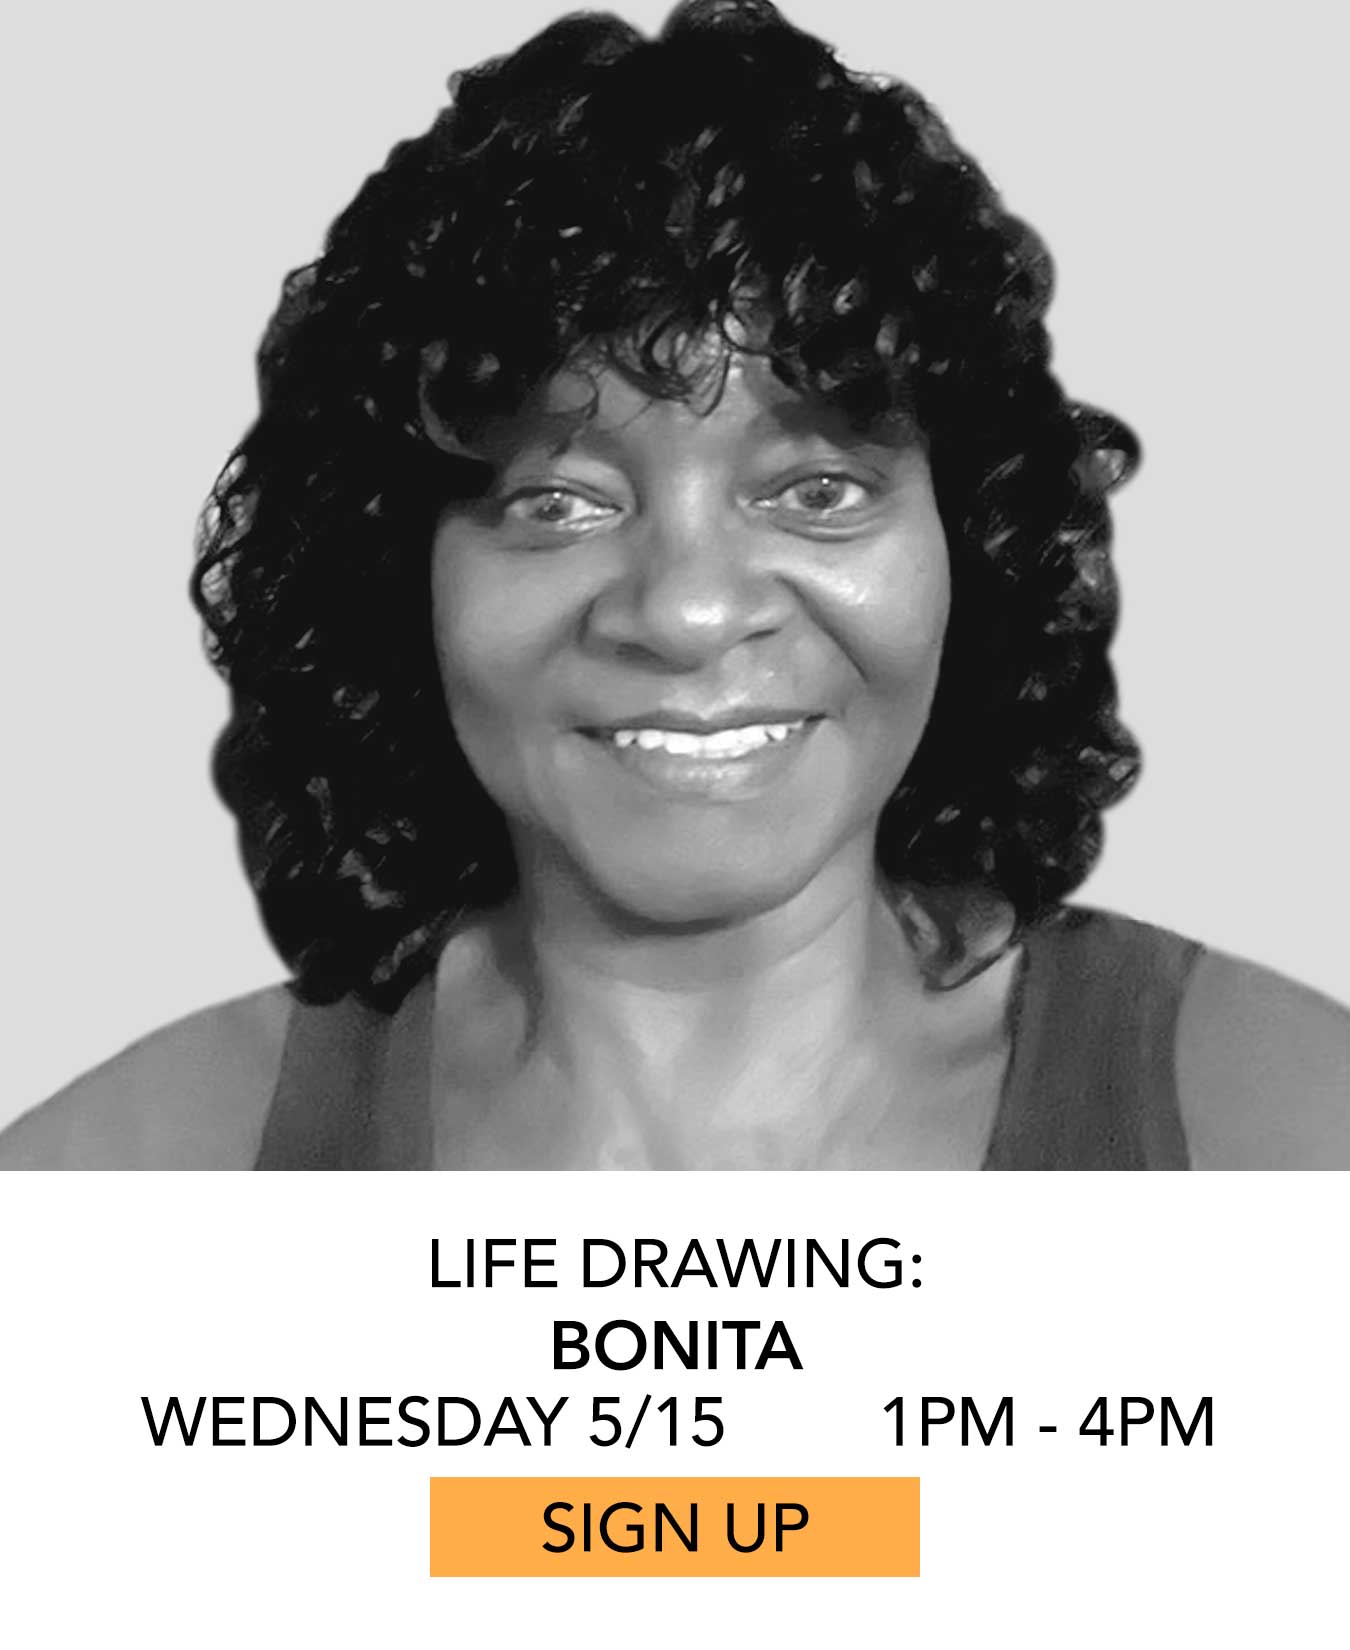 Life Drawing: Bonita. Wednesday 5/15 from 1pm to 4pm. Click to Sign Up.